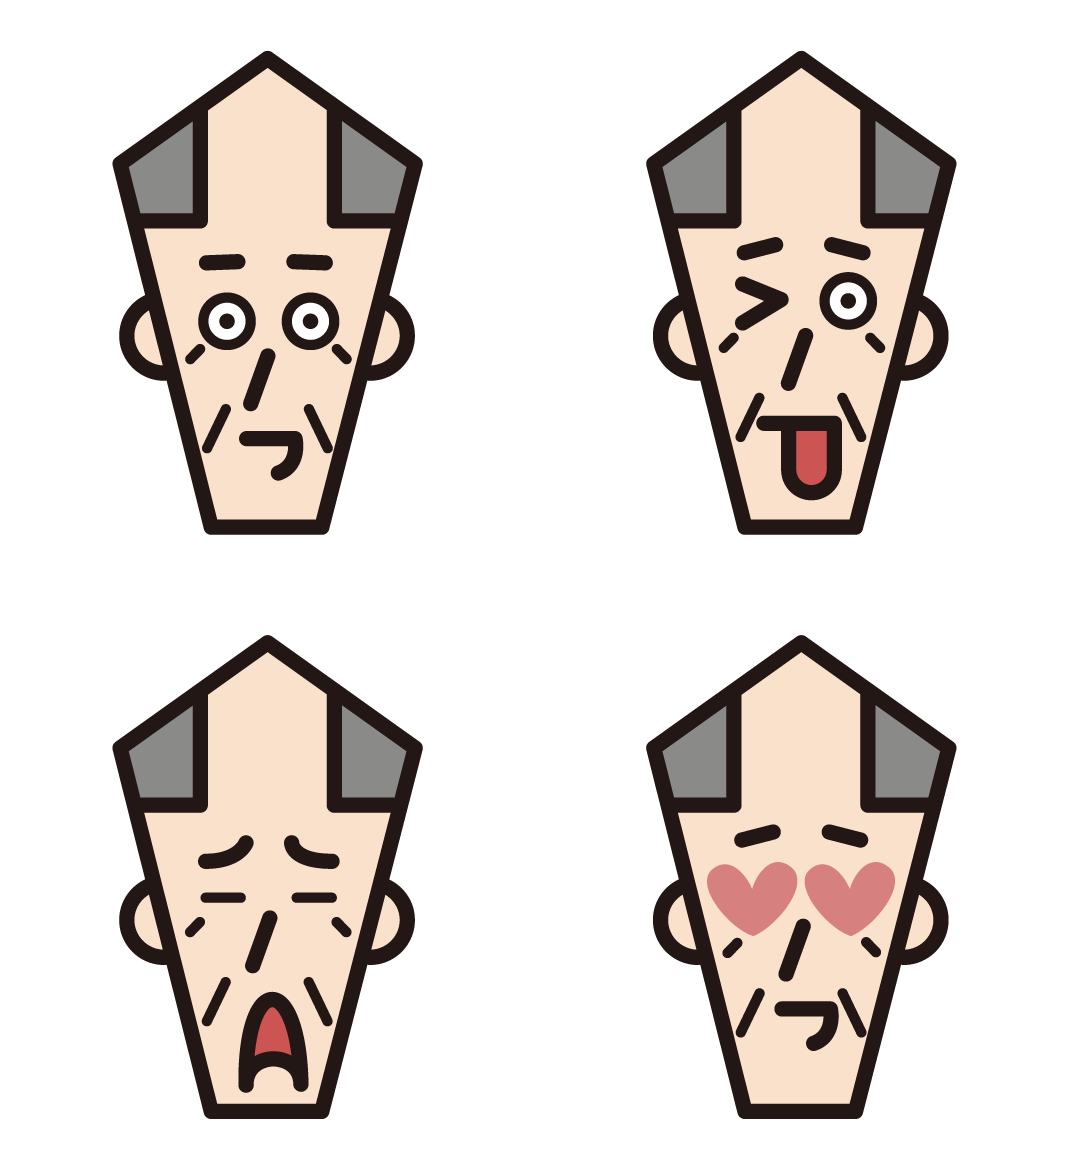 Illustrations of the various facial expressions (thinning hair) of the old man 2